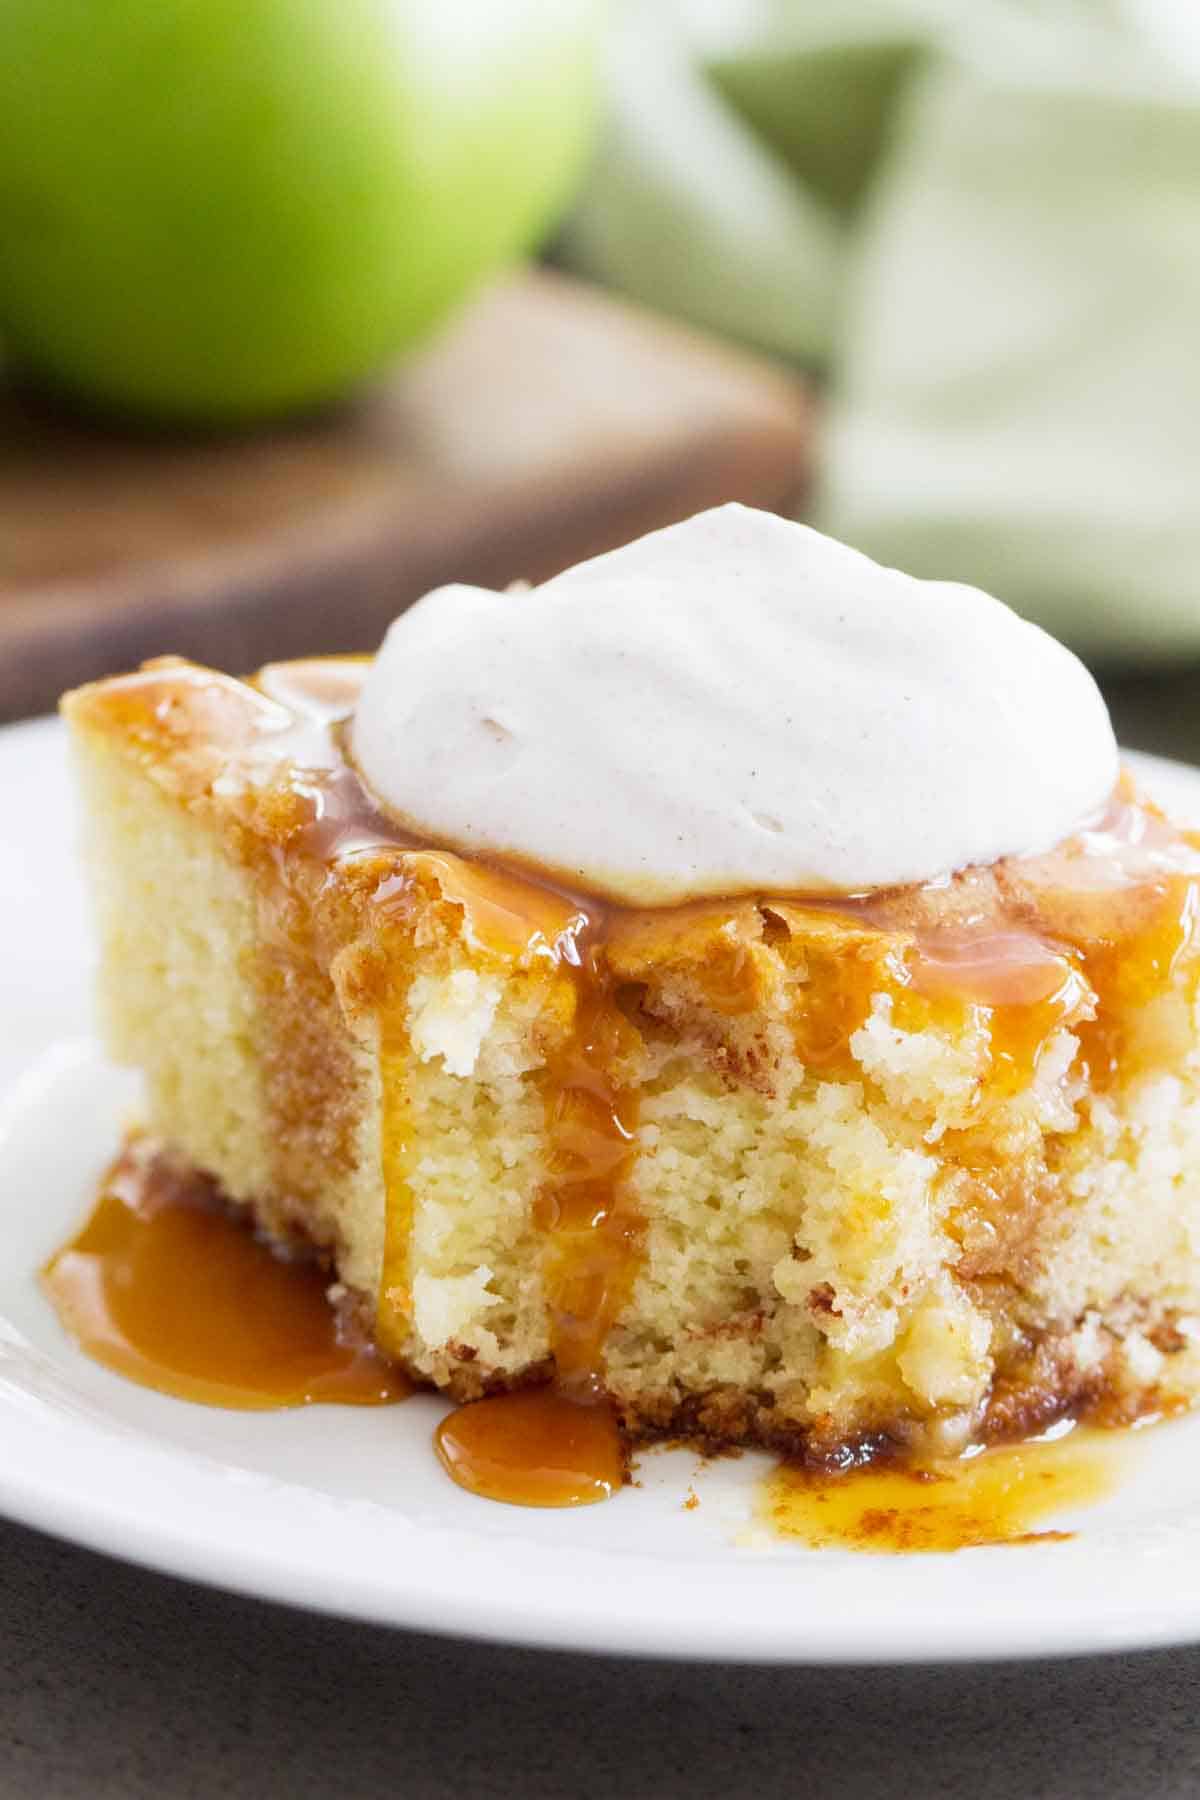 close up shot of apple cinnamon cake, showing texture of cake